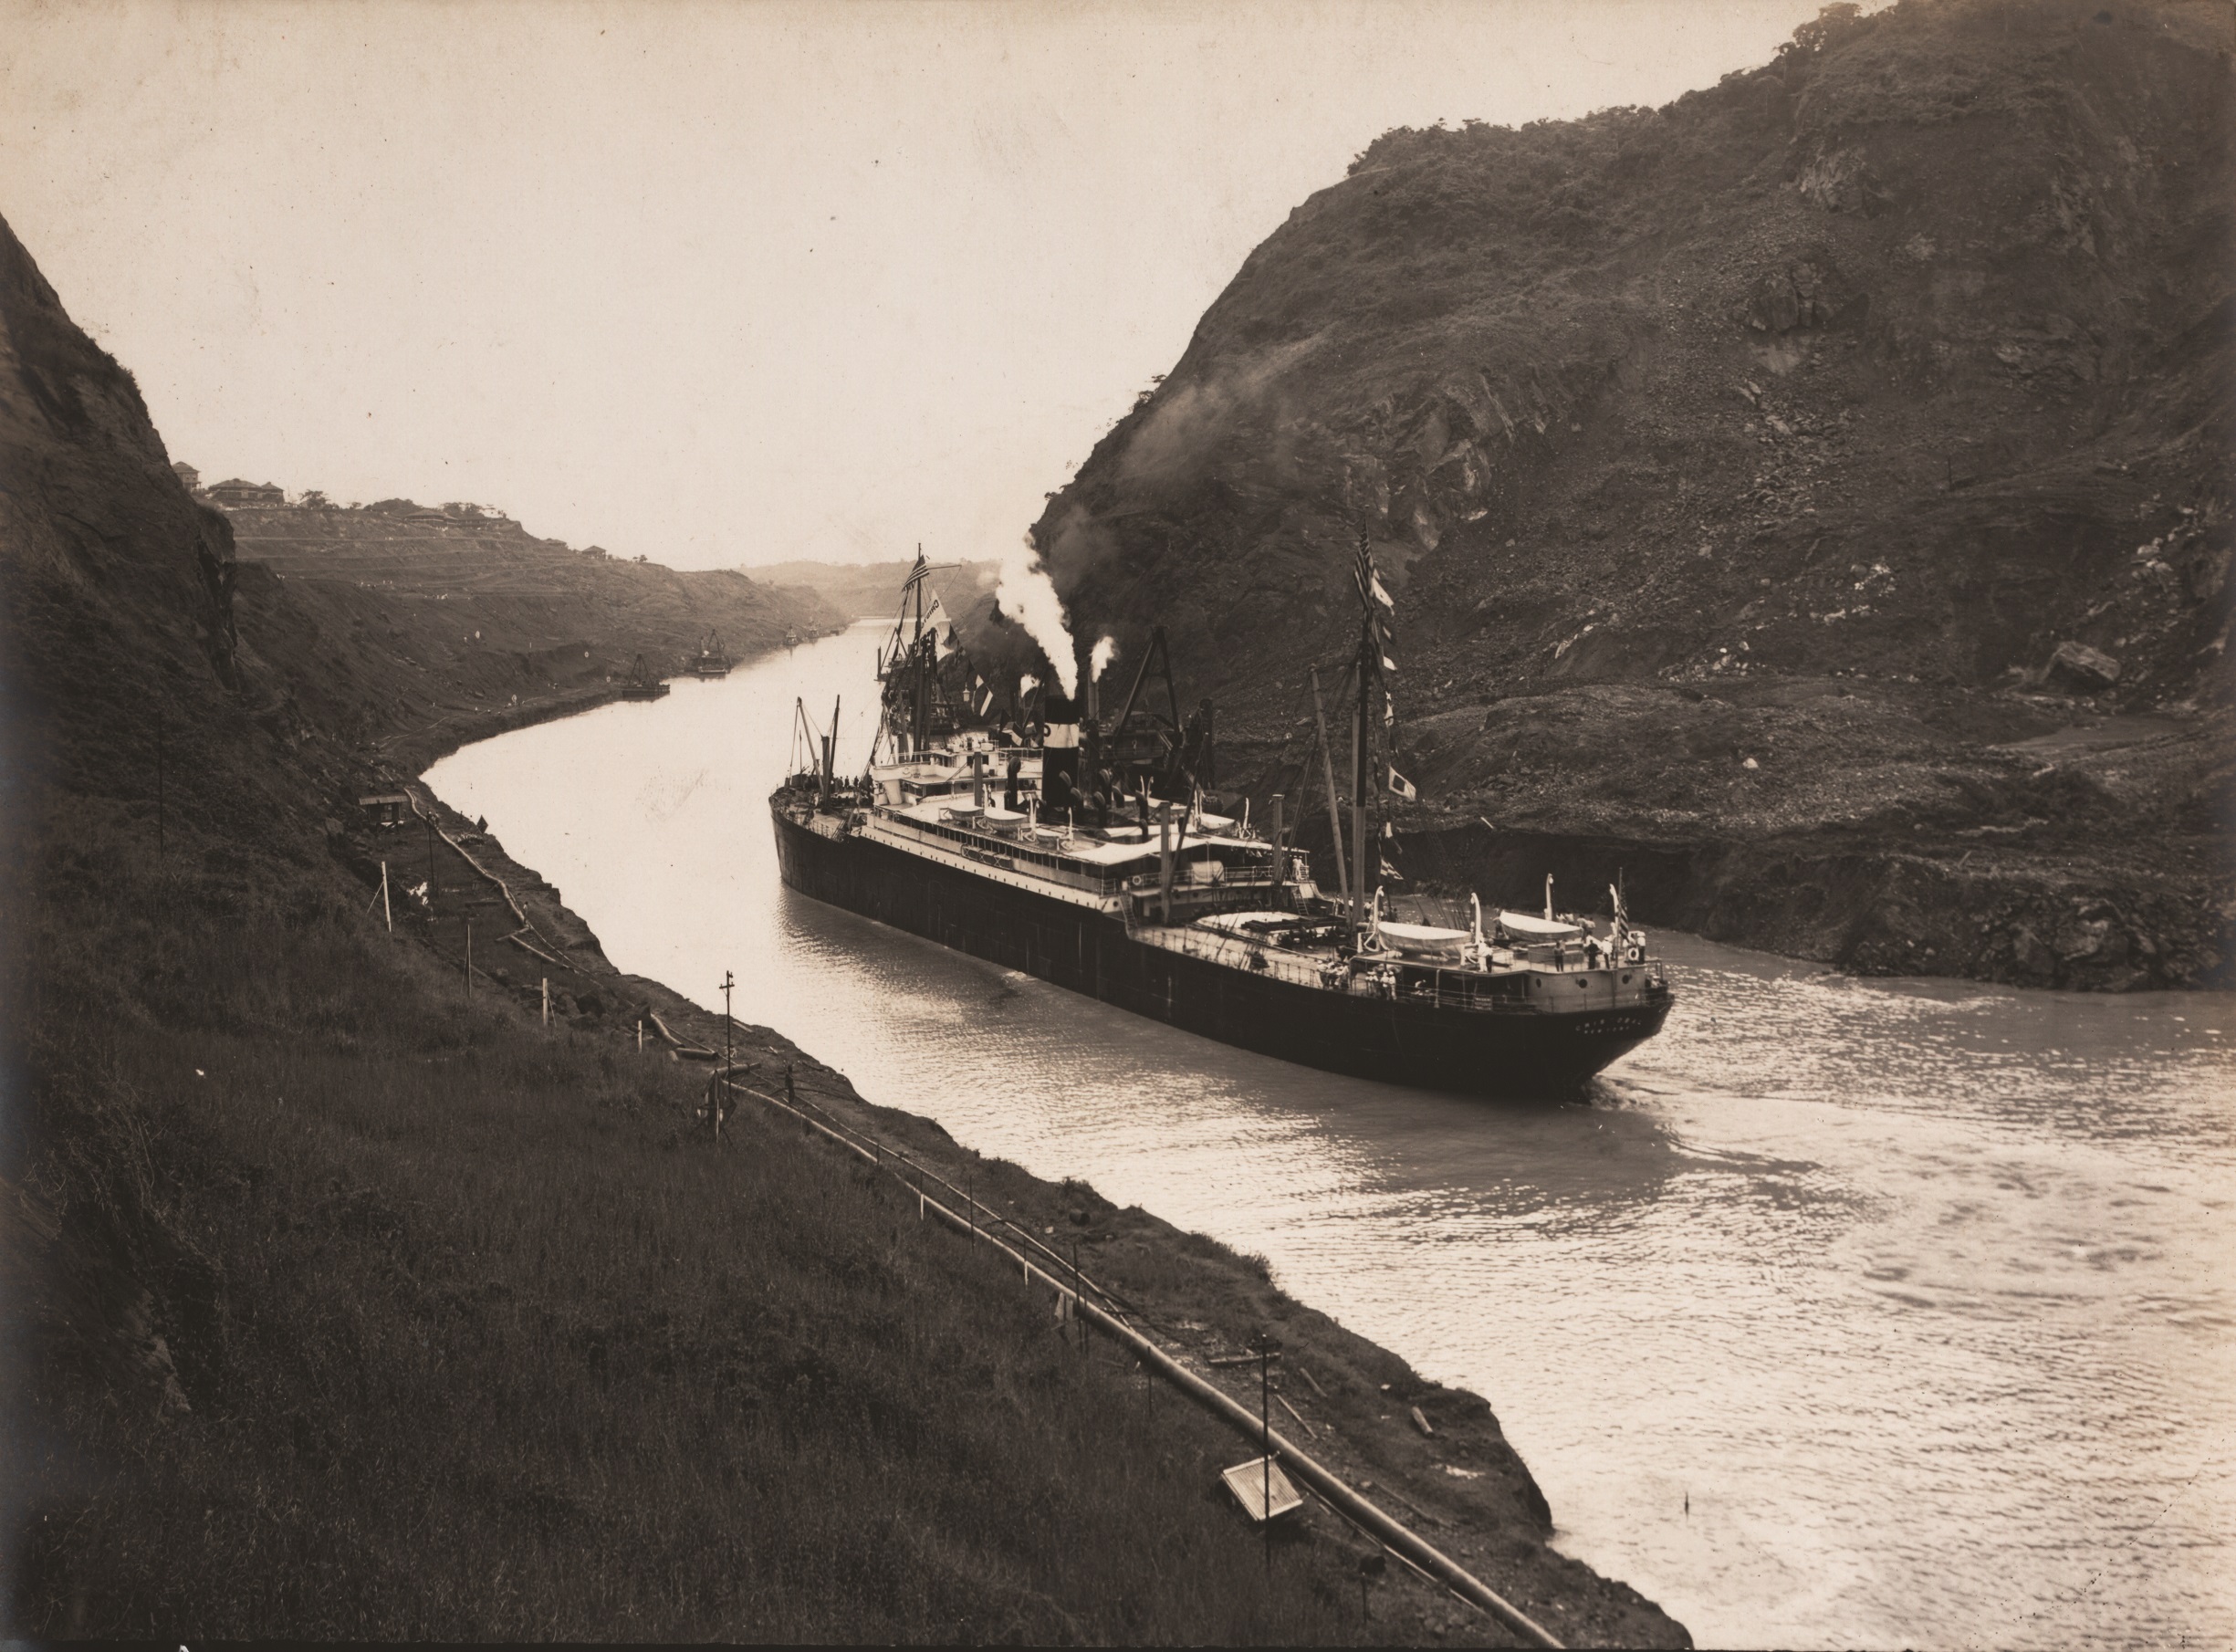 The S.S. Cristobal on the return trip through the Panama Canal, August 4, 1914.